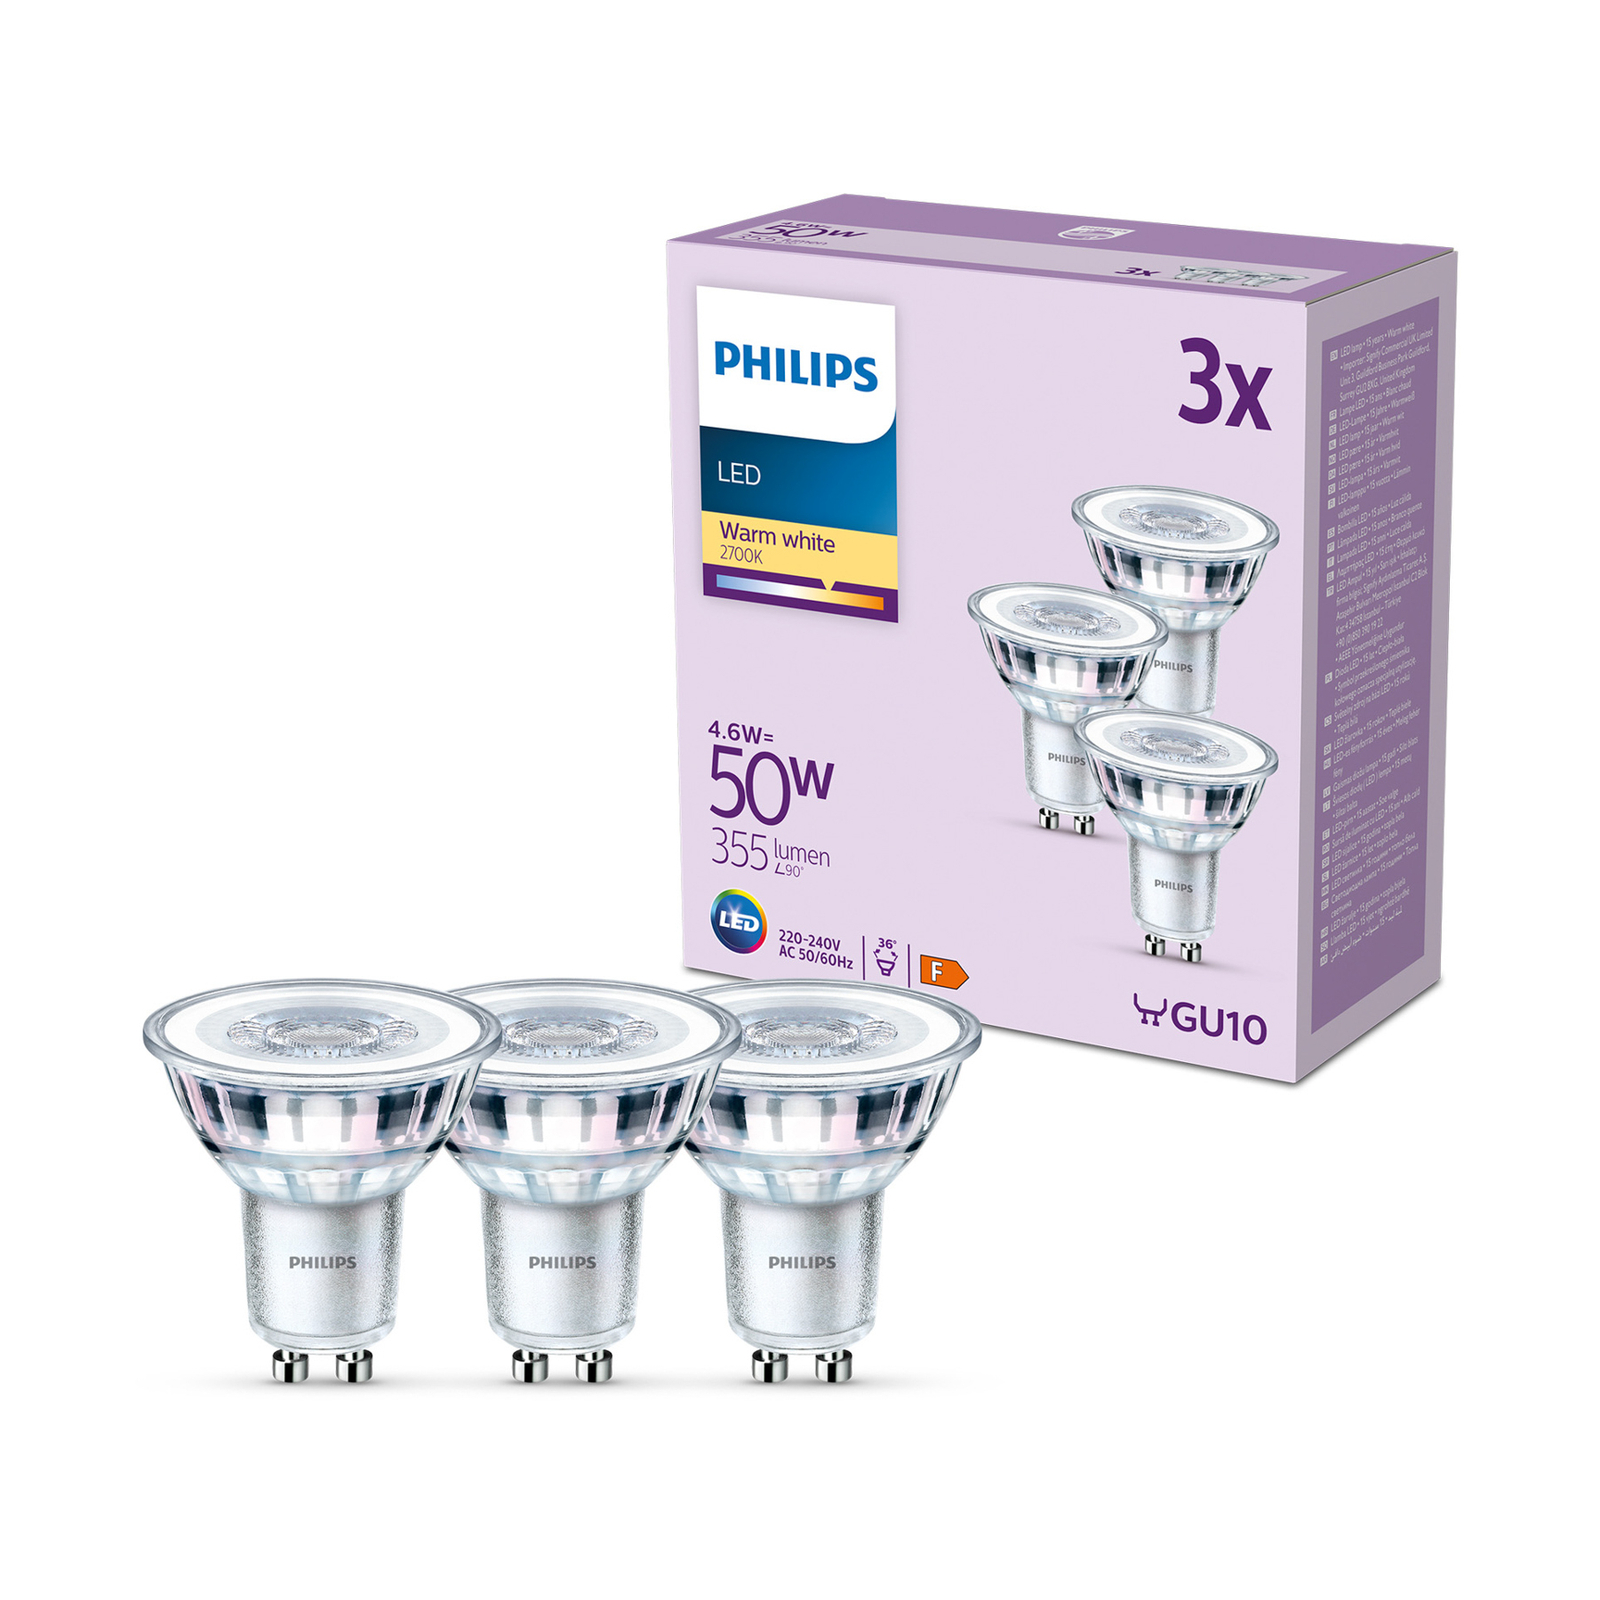 Philips LED GU10 4,6 W 355lm 827 claire 36° x3